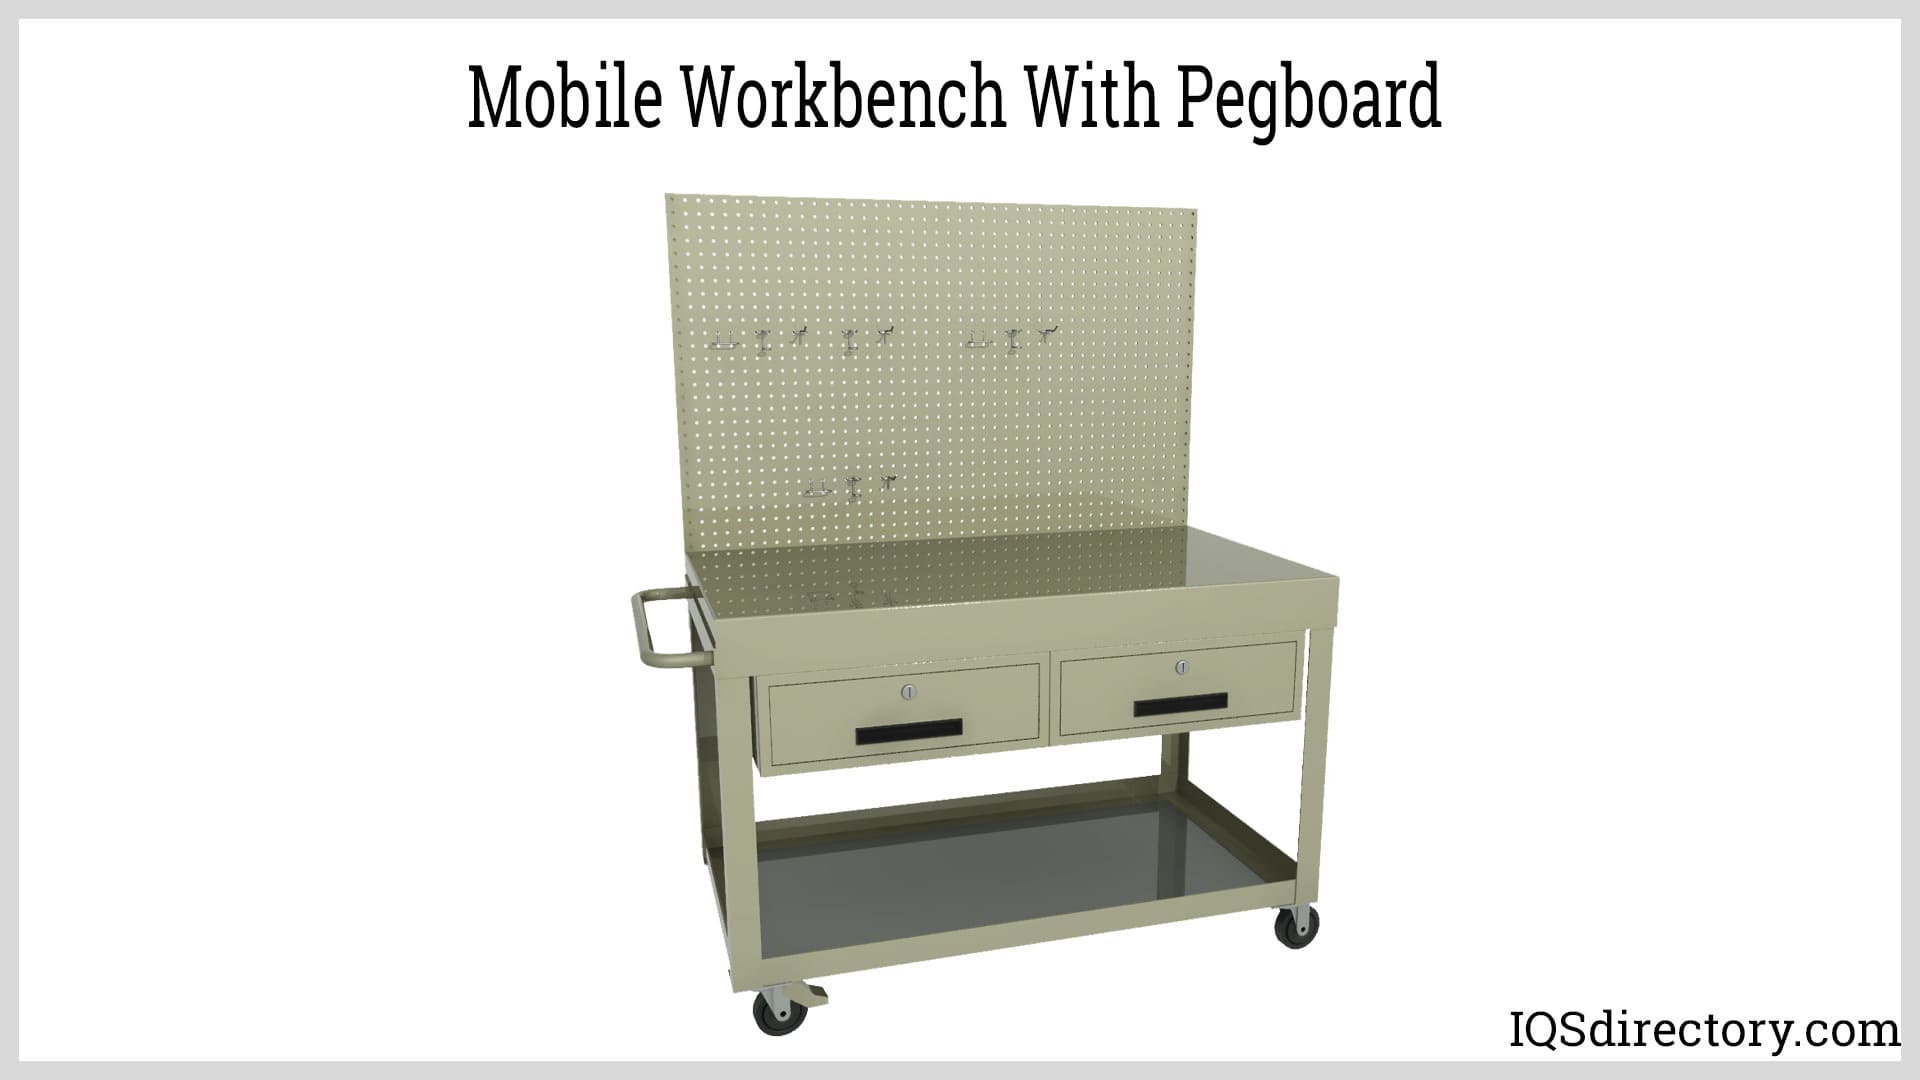 Mobile Workbench With Pegboard